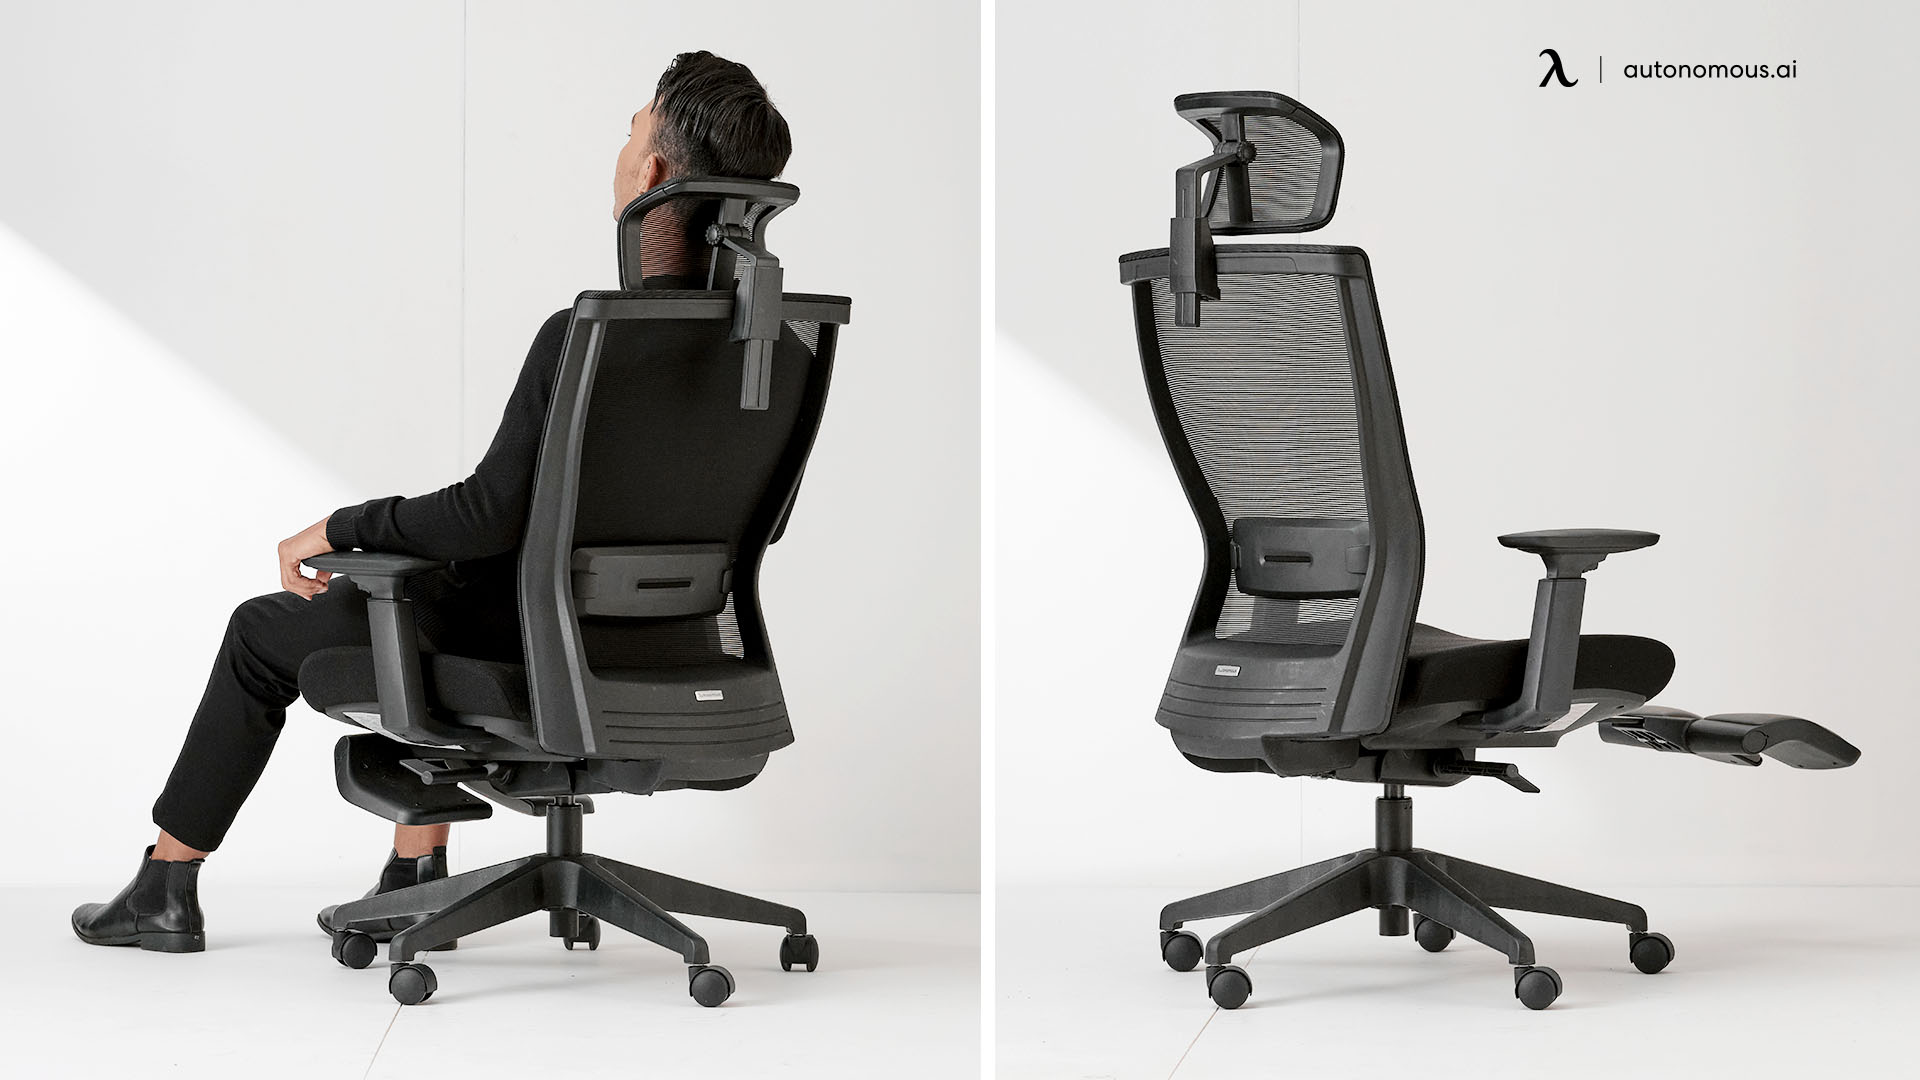 Finding the Suitable Office Chair Dimensions (Step by Step)